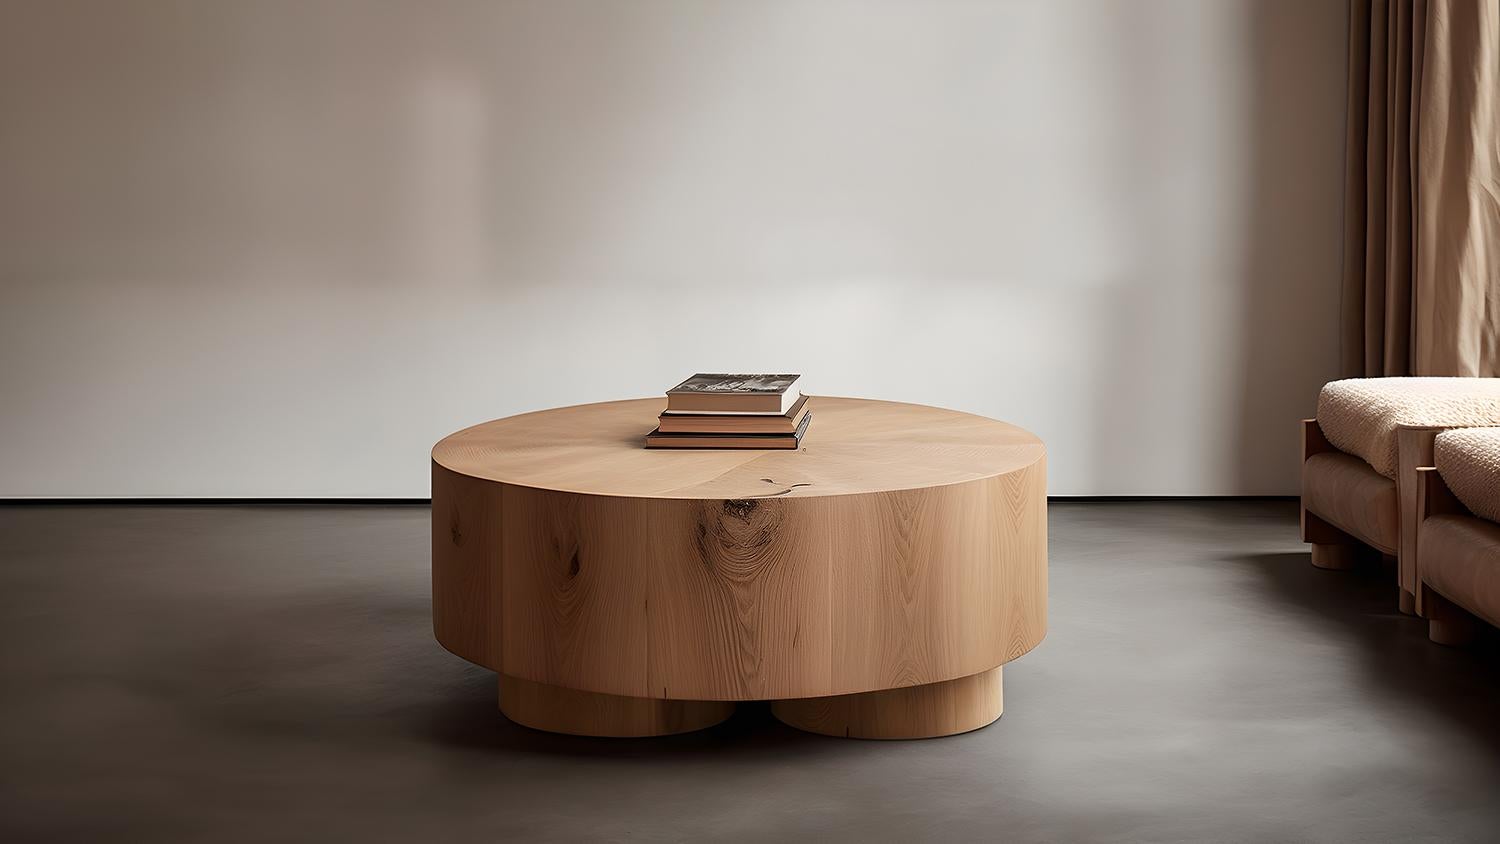 Podio XL circular coffee table

The NONO design team presents a coffee table that exudes elegance and modernity. The foundation of this piece is a cluster of cylindrical columns, providing a sturdy base for the beautiful round top. Its simplicity